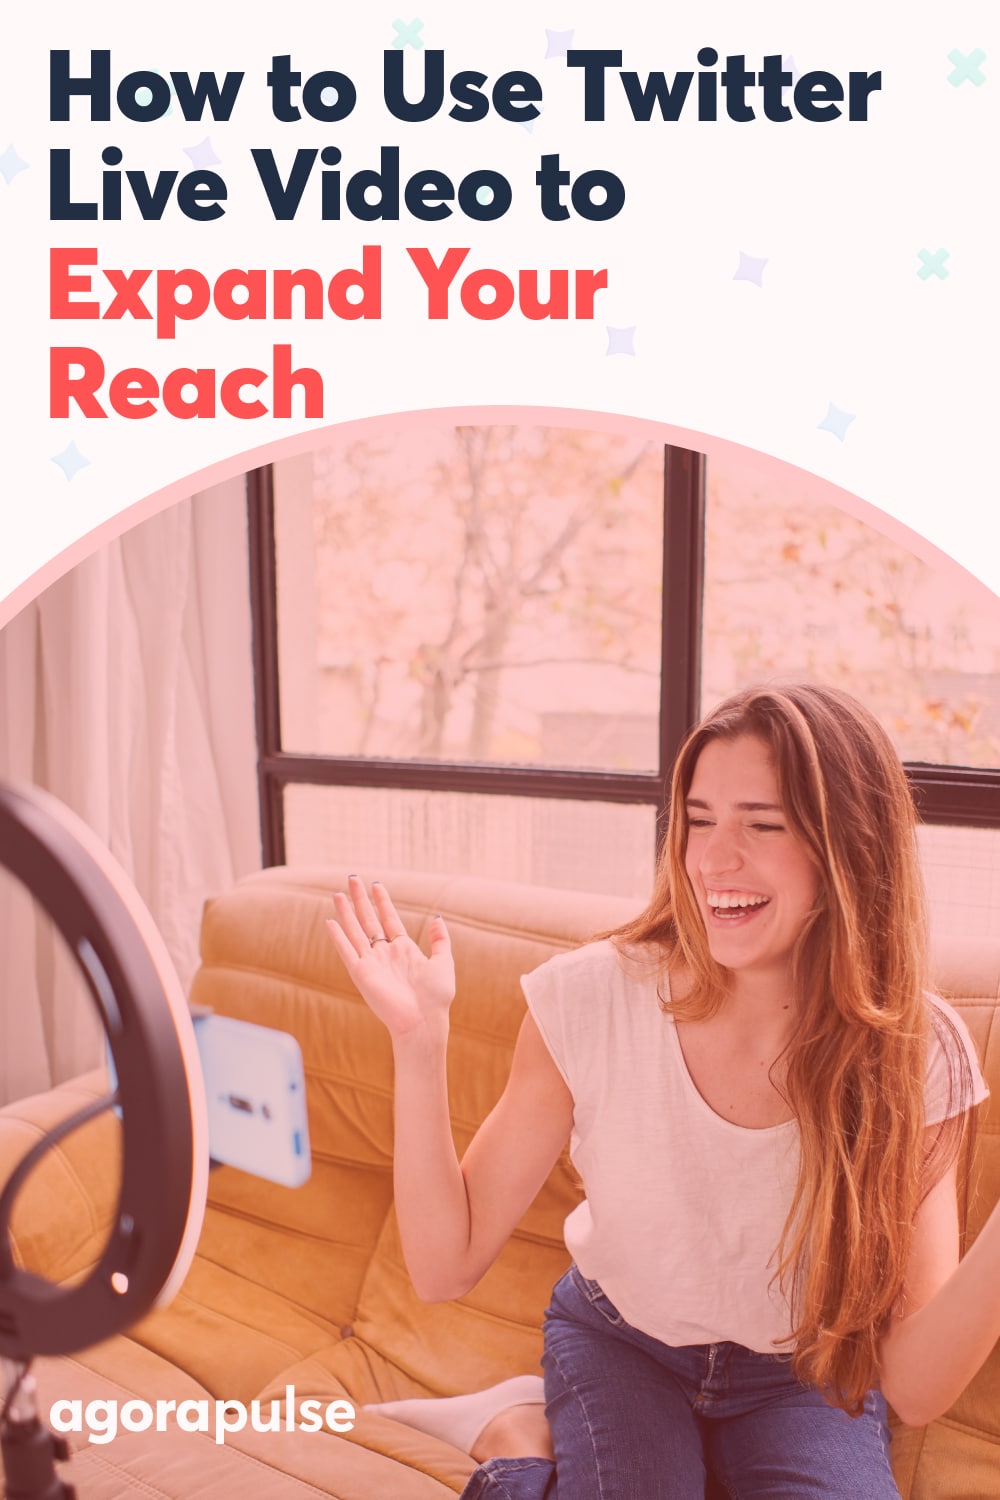 How to Use Twitter Live Video to Expand Your Reach